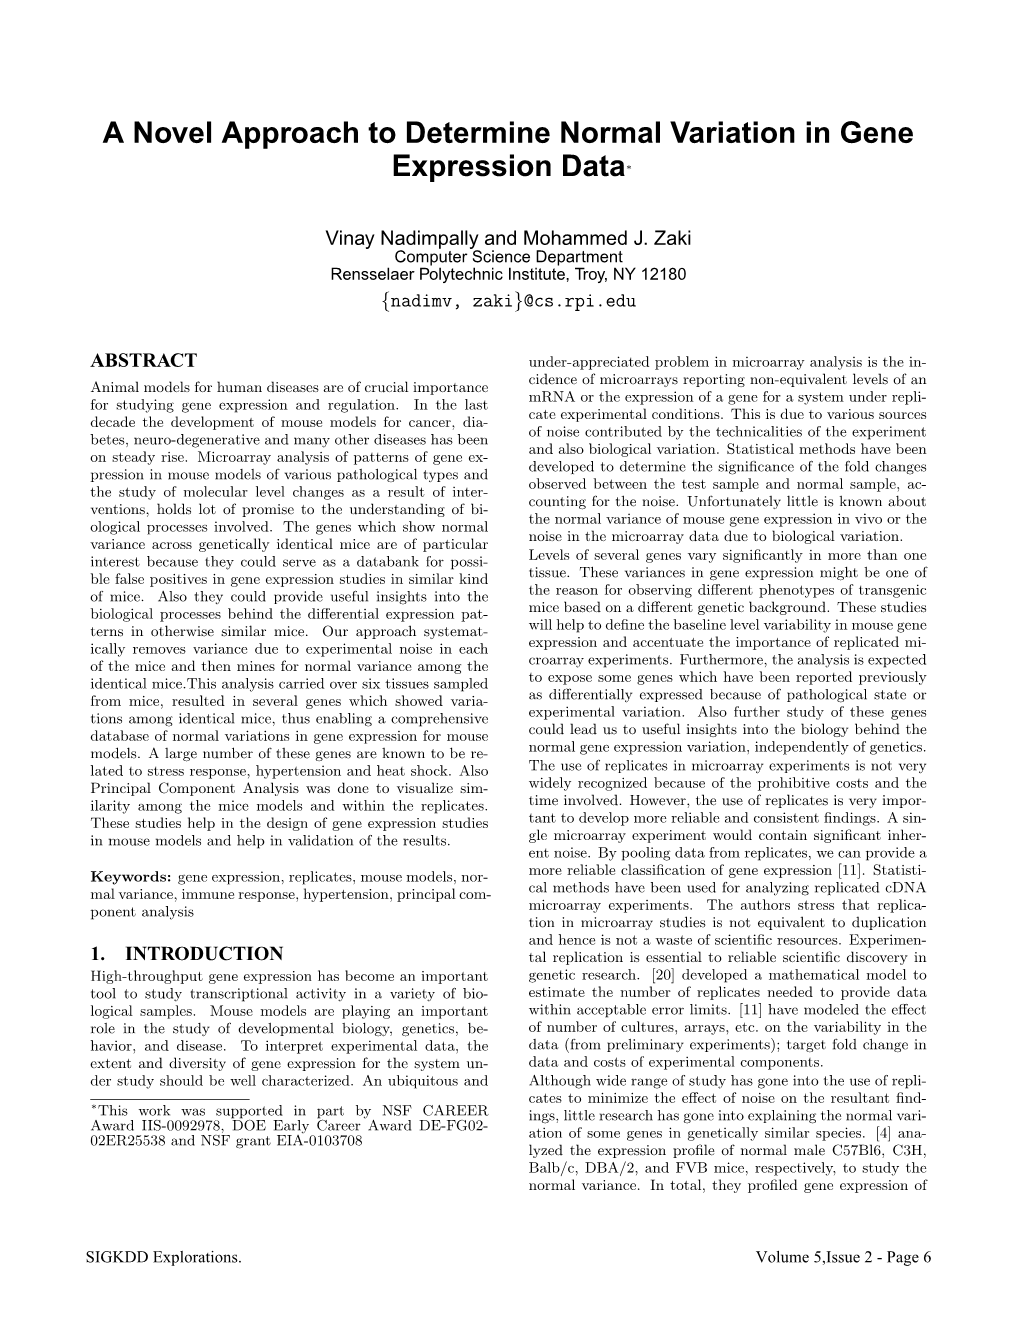 A Novel Approach to Determine Normal Variation in Gene Expression Data∗